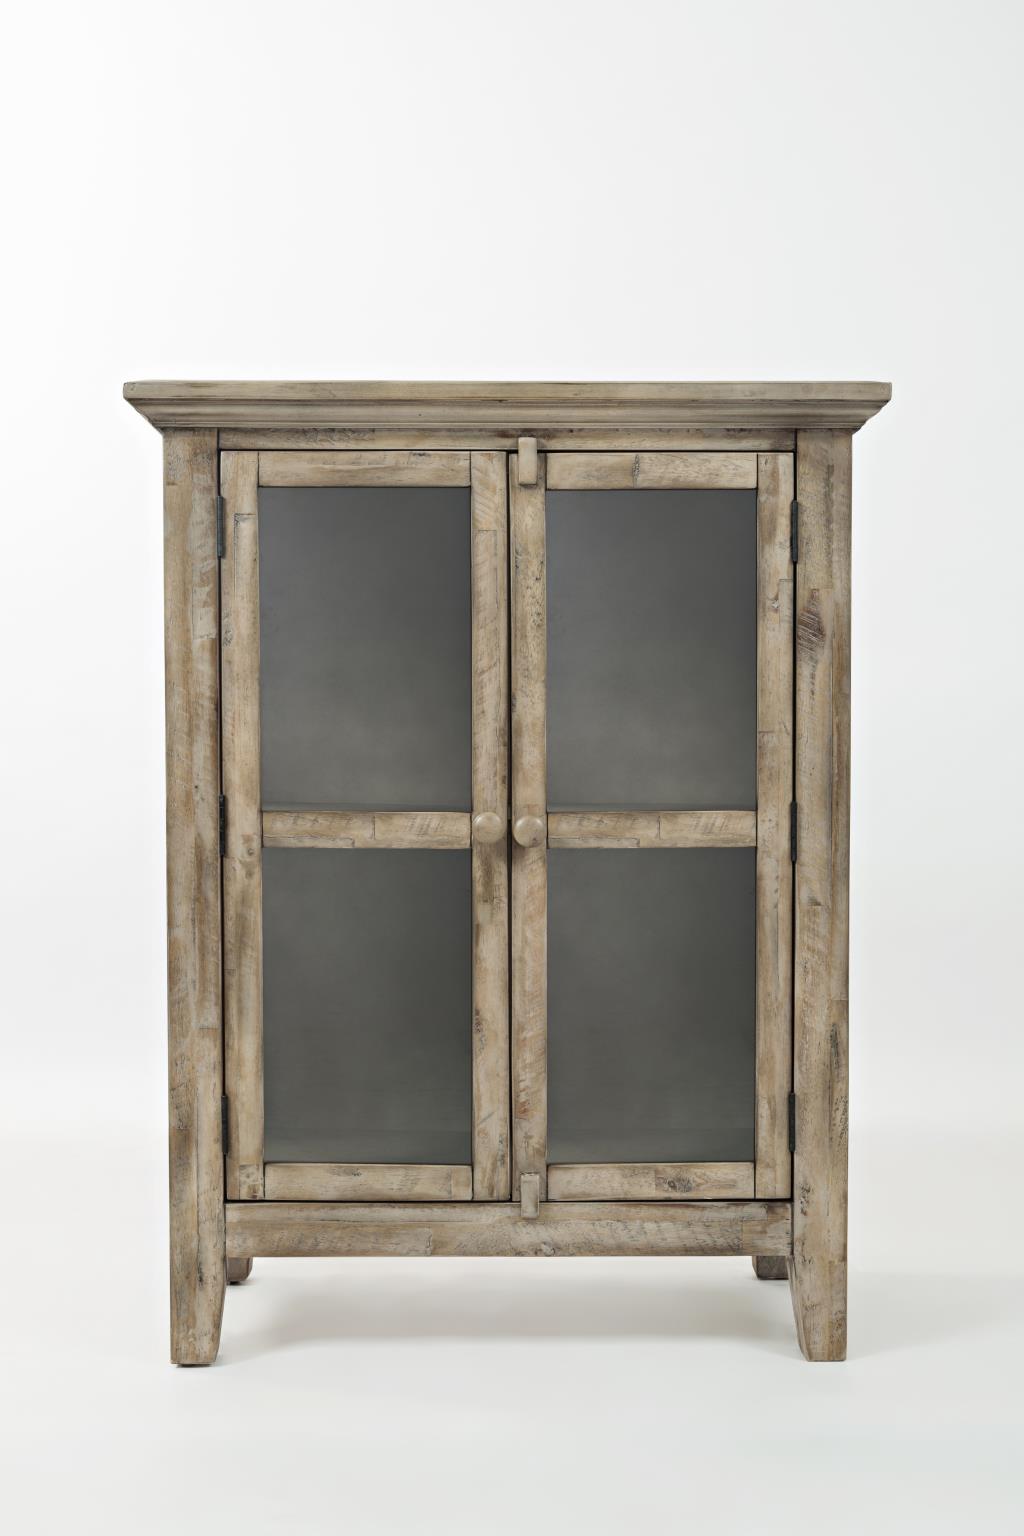 Rustic Shores 32" Accent Cabinet Watch Hill Weathered Grey